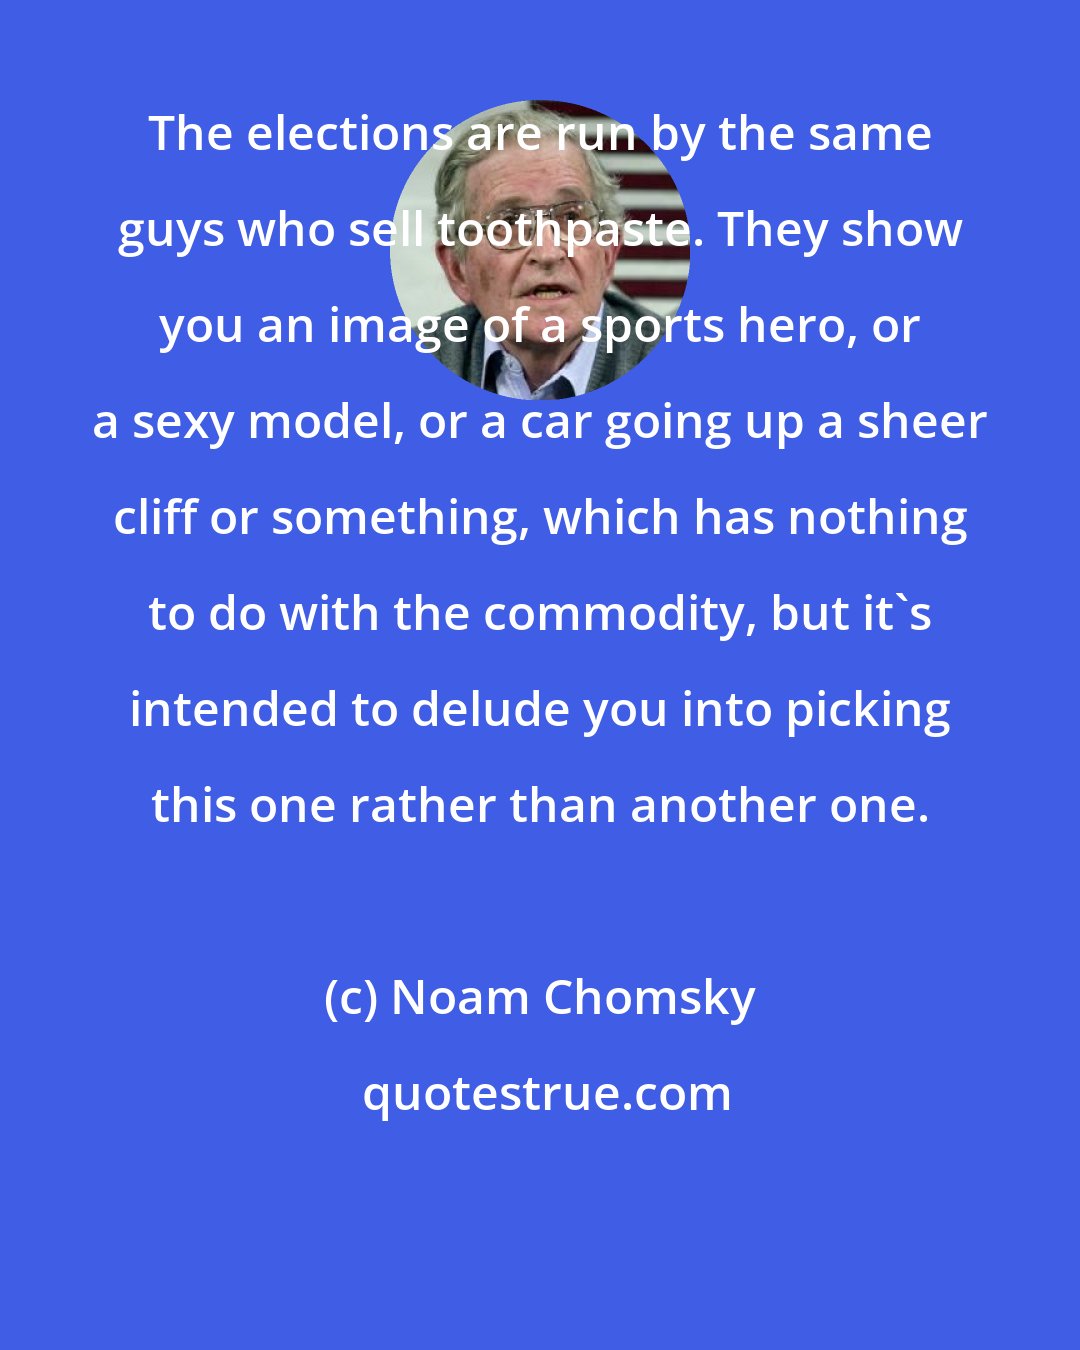 Noam Chomsky: The elections are run by the same guys who sell toothpaste. They show you an image of a sports hero, or a sexy model, or a car going up a sheer cliff or something, which has nothing to do with the commodity, but it's intended to delude you into picking this one rather than another one.